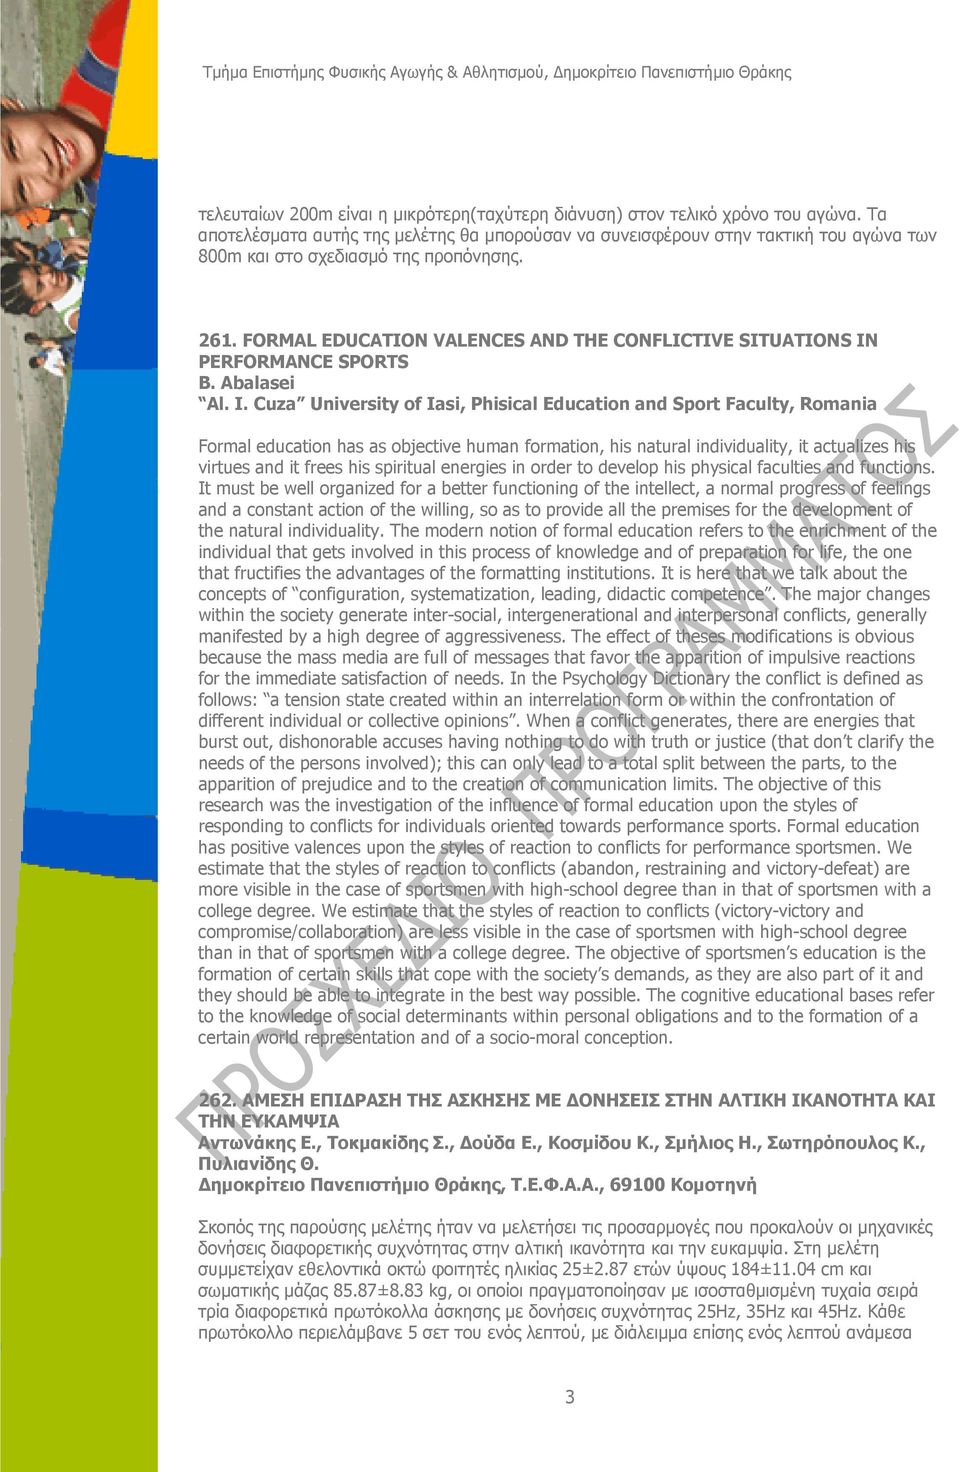 FORMAL EDUCATION VALENCES AND THE CONFLICTIVE SITUATIONS IN